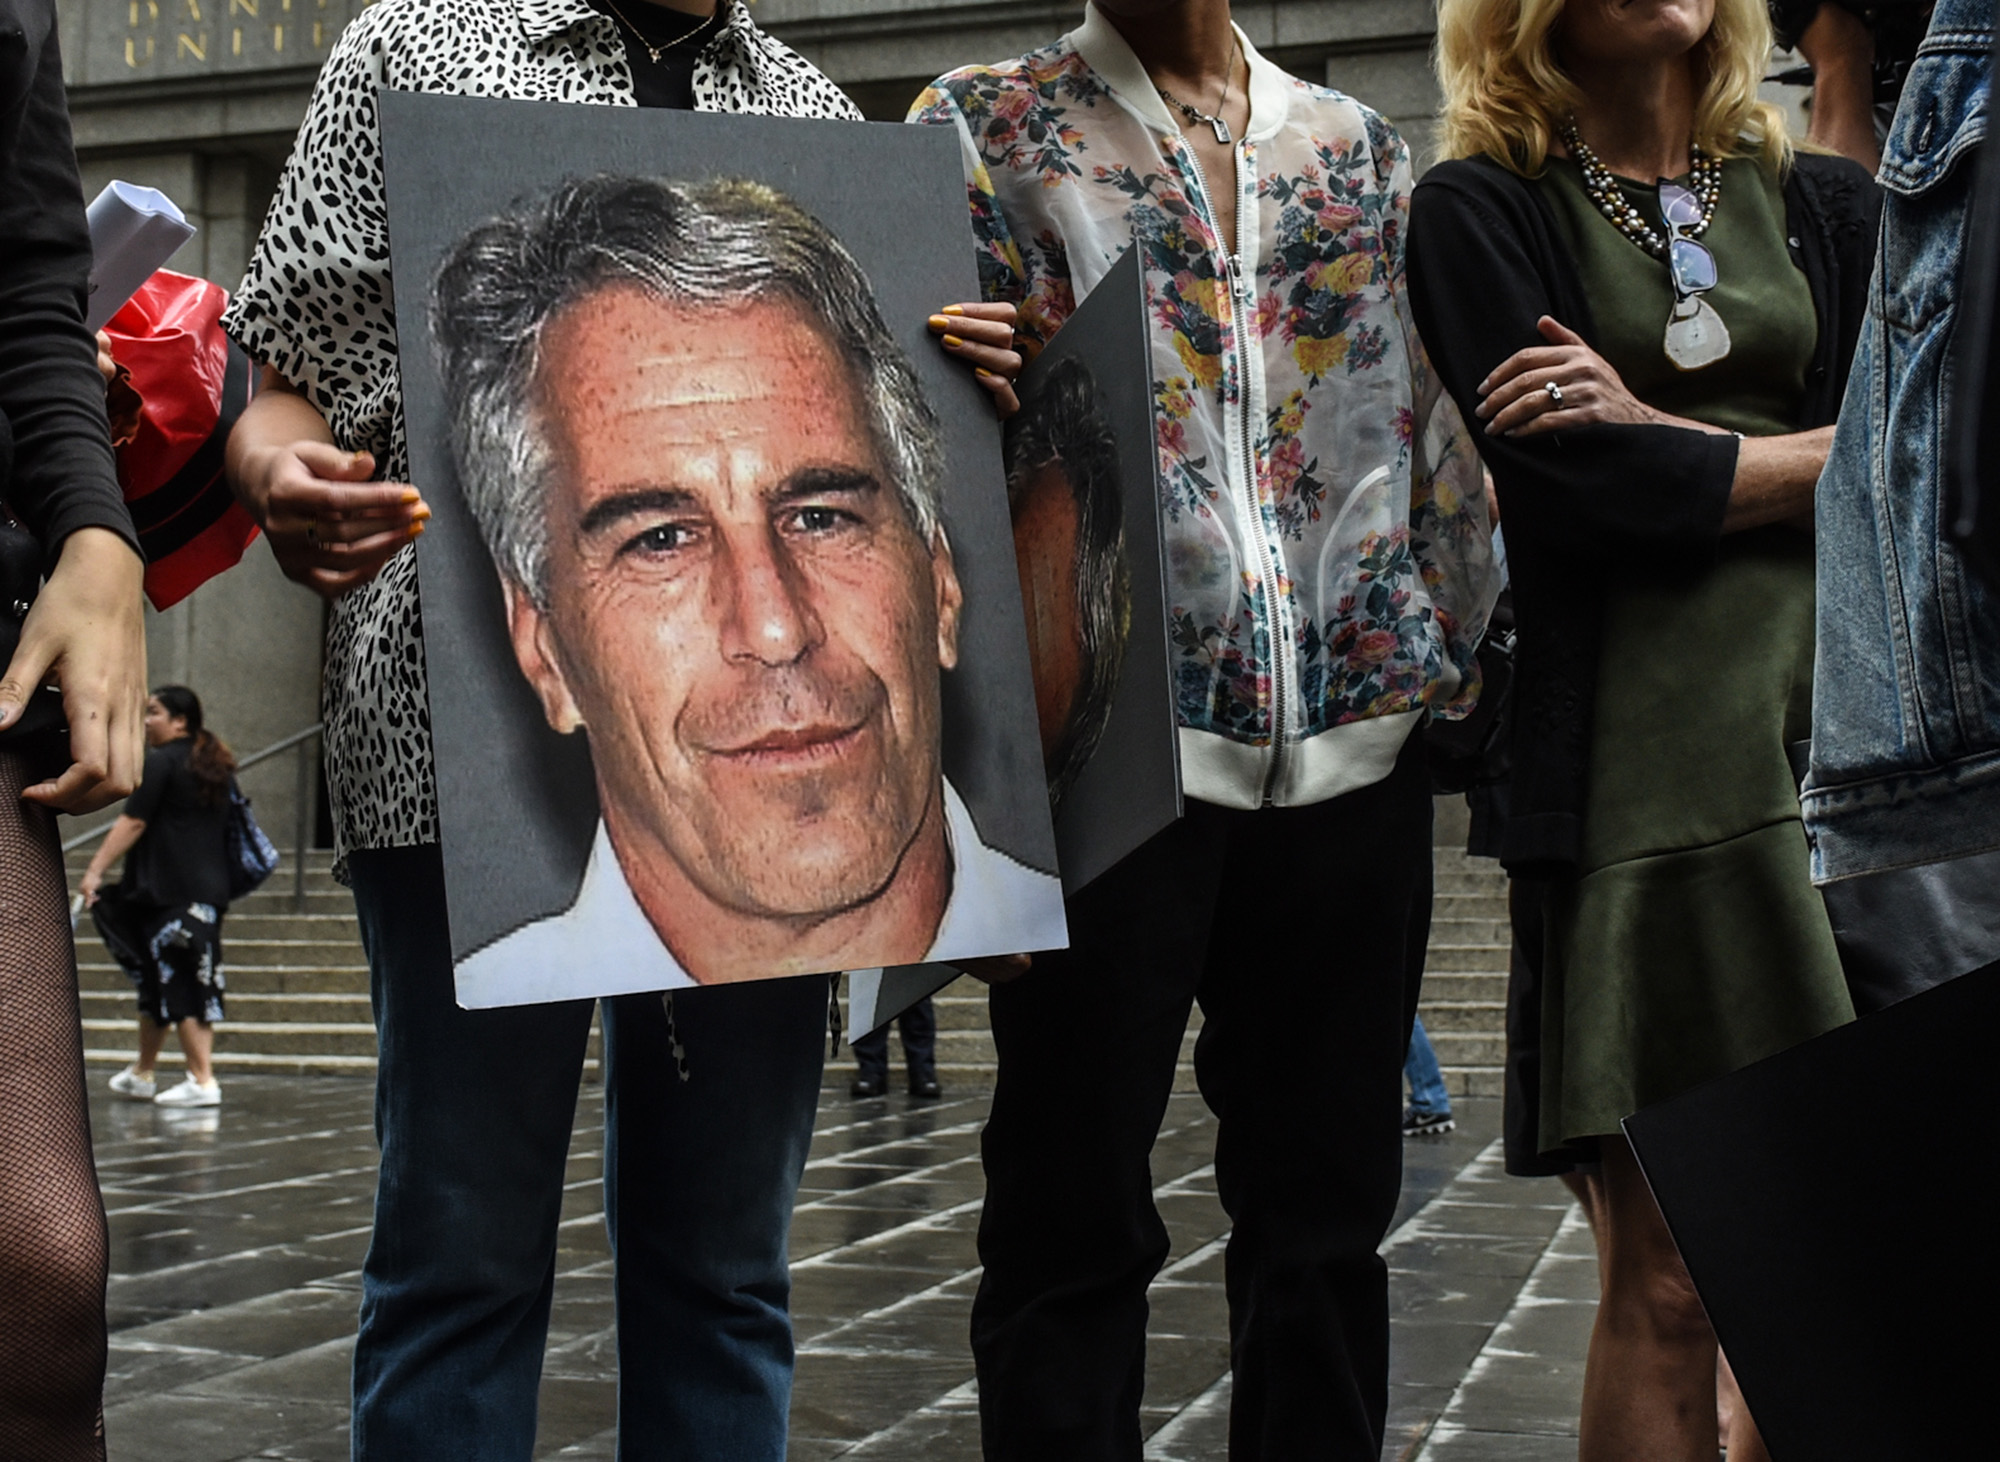 Jeffrey Epstein, Prince Andrew Woman Claims Underage Encounters